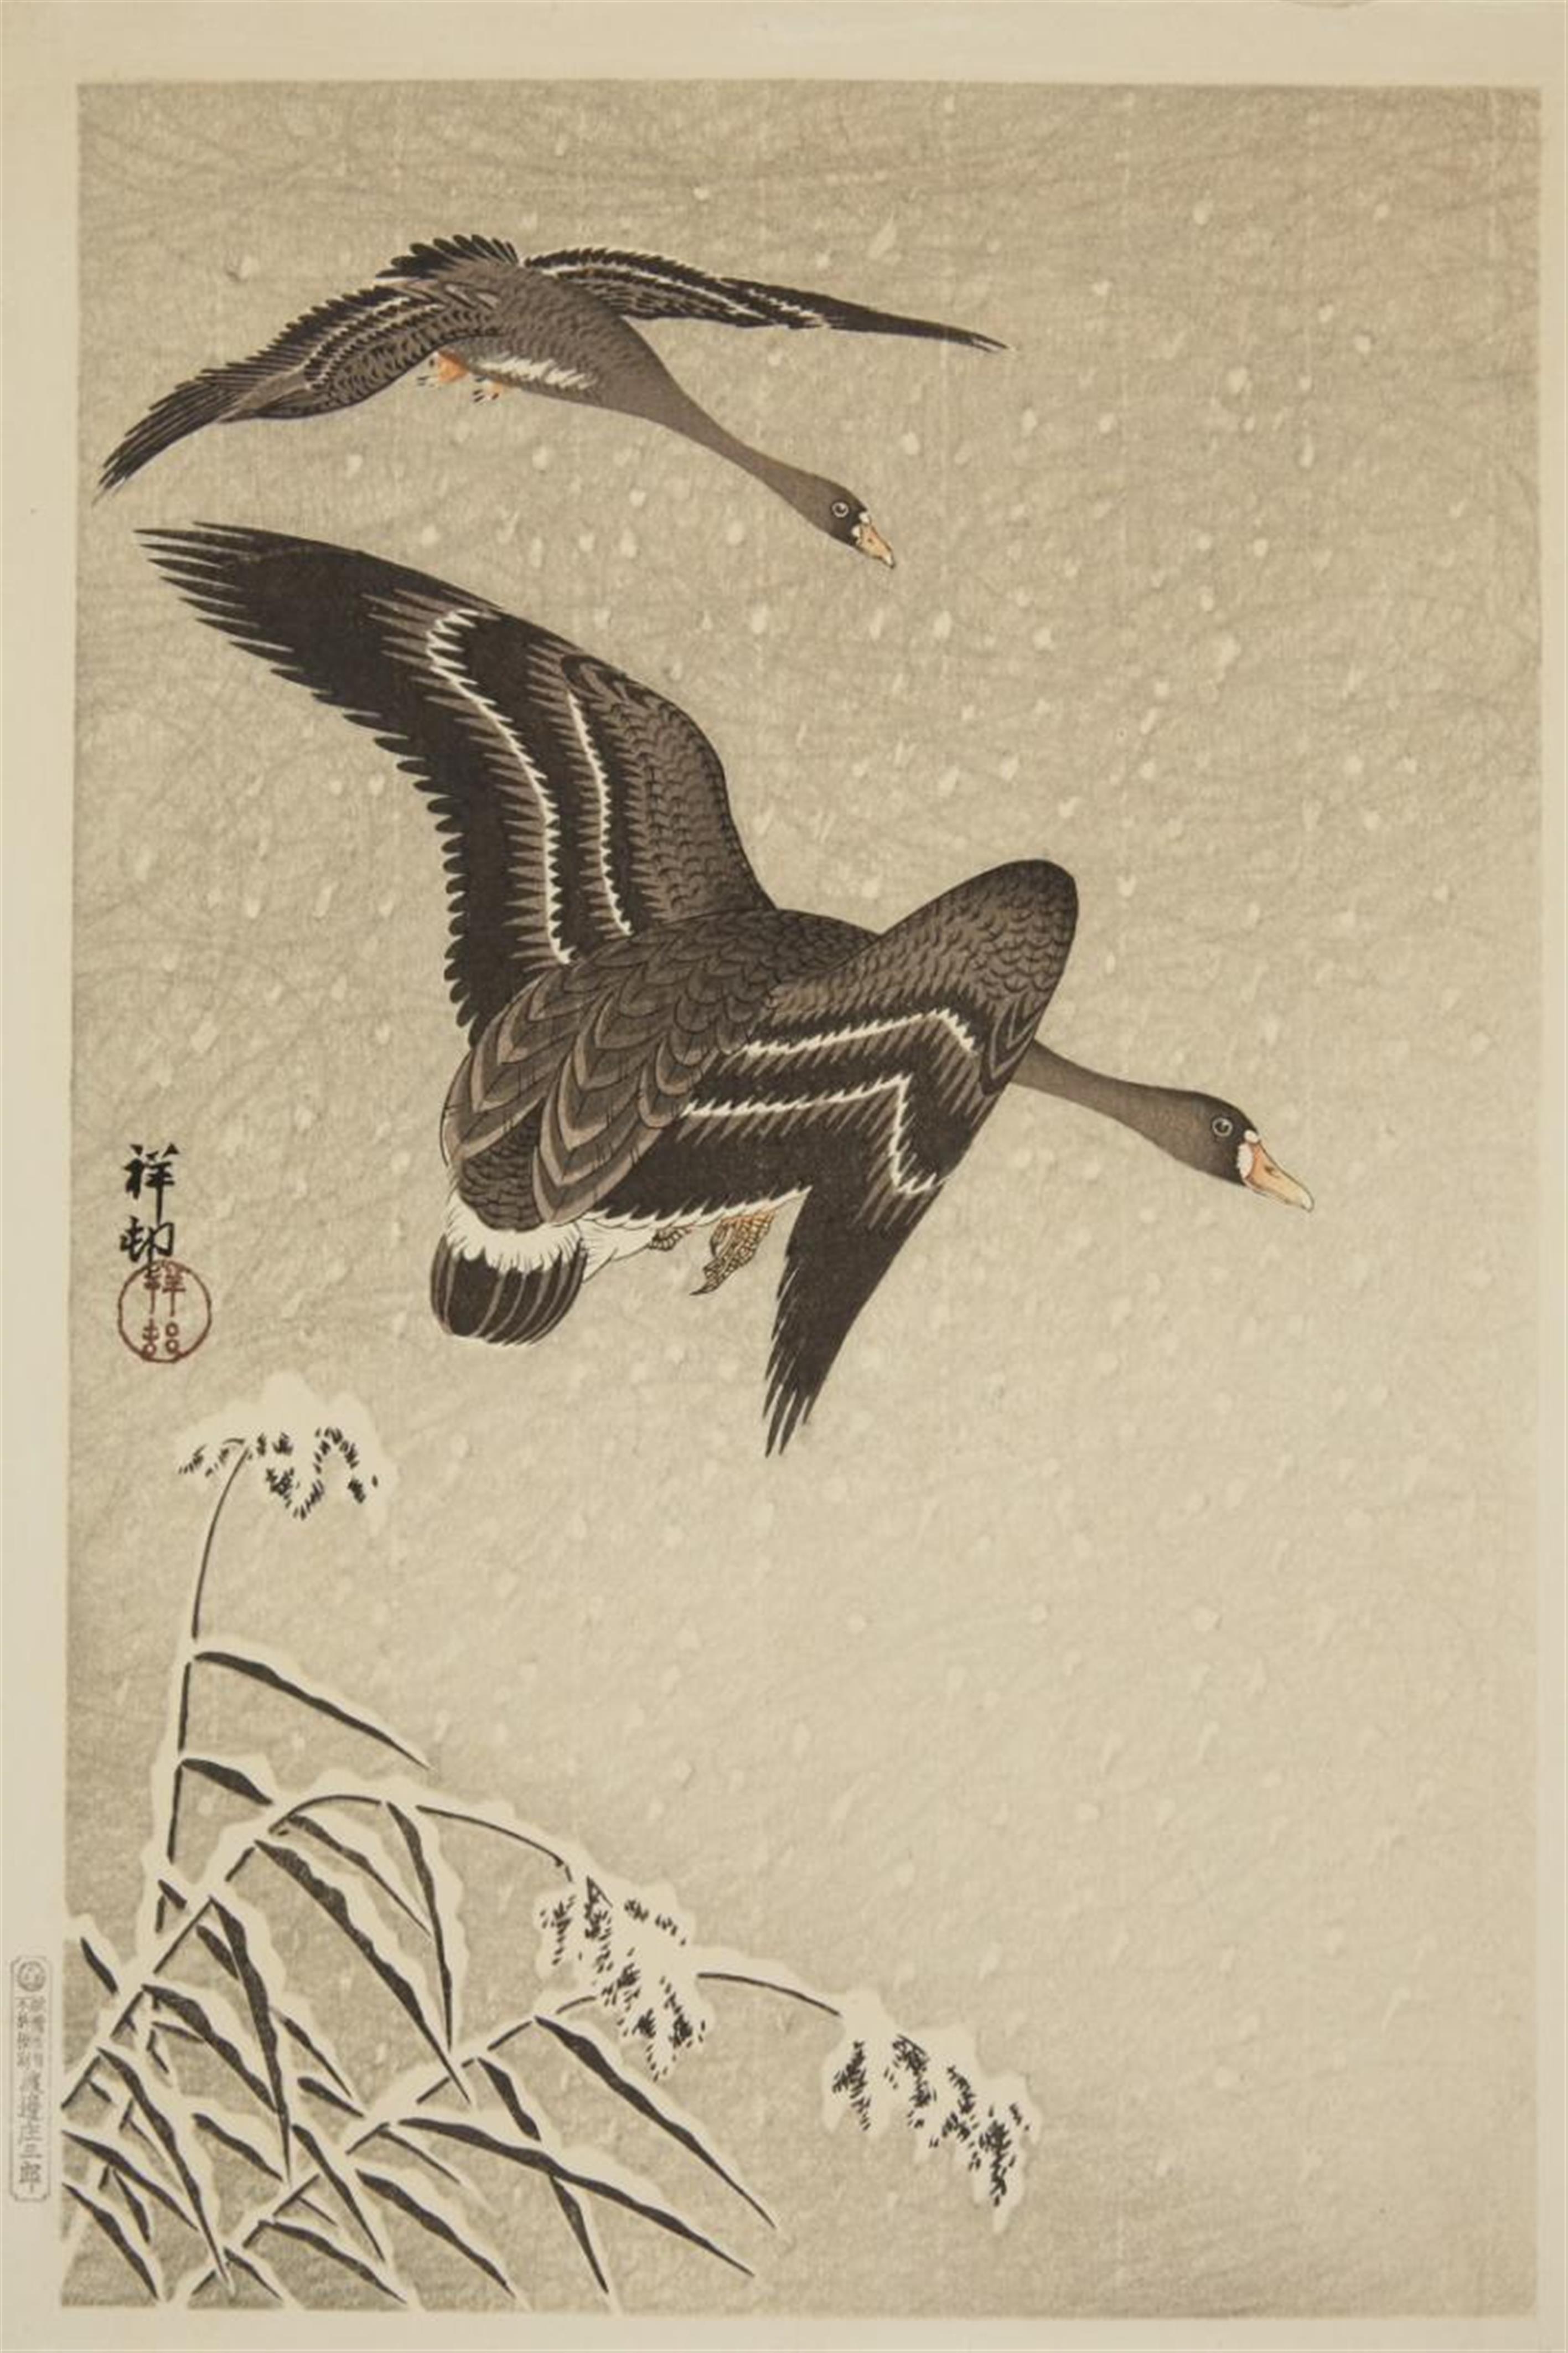 Ohara Shoson - Oban. Geese flying over snow-covered reeds. Signed: Shoson. Seal: Shoson. Publisher: Watanabe Shozaburo. 1931-1941. Stamped on verso: Made in Japan. - image-1